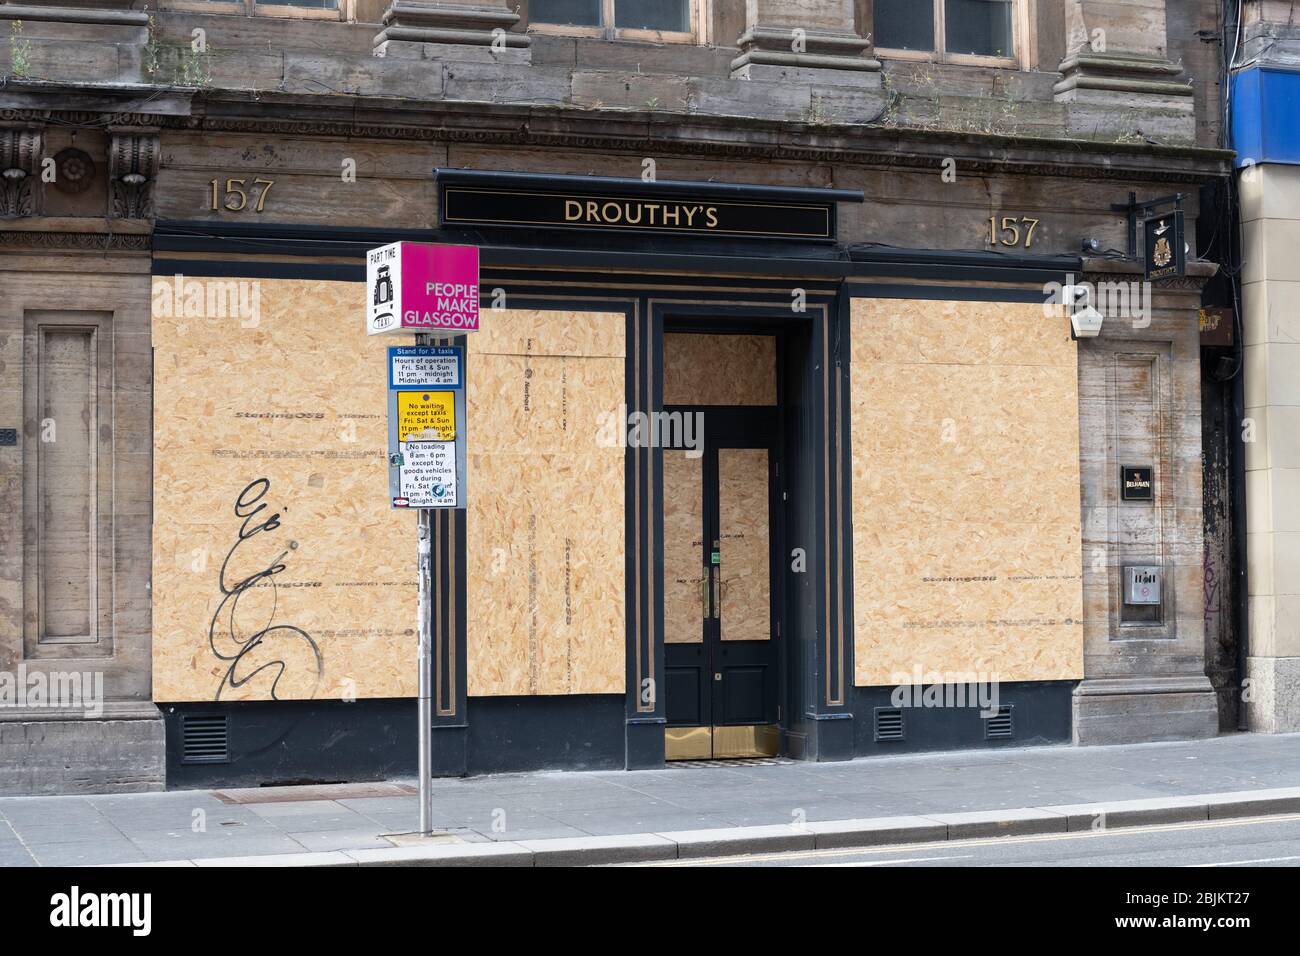 Drouthy's - a Belhaven pub, Queen Street, Glasgow - boarded up during the coronavirus pandemic lockdown, Scotland, UK Stock Photo